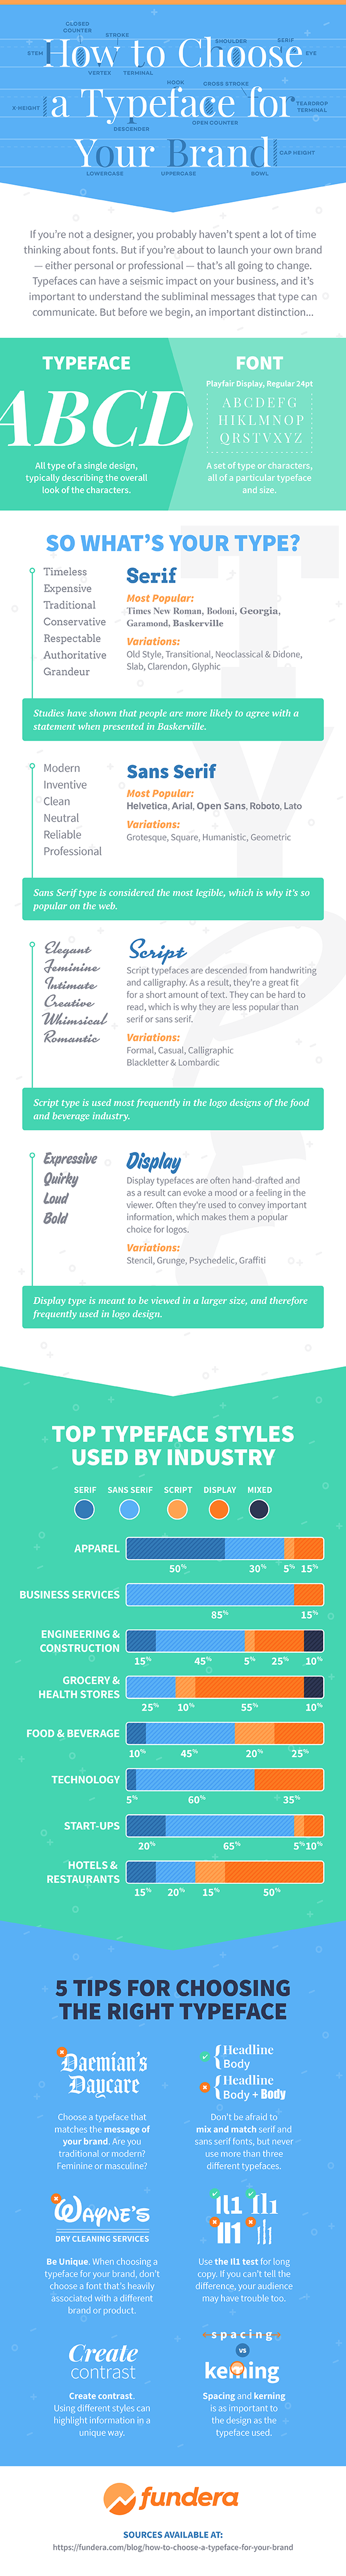 How To Choose A Typeface For Your Brand - #infographic